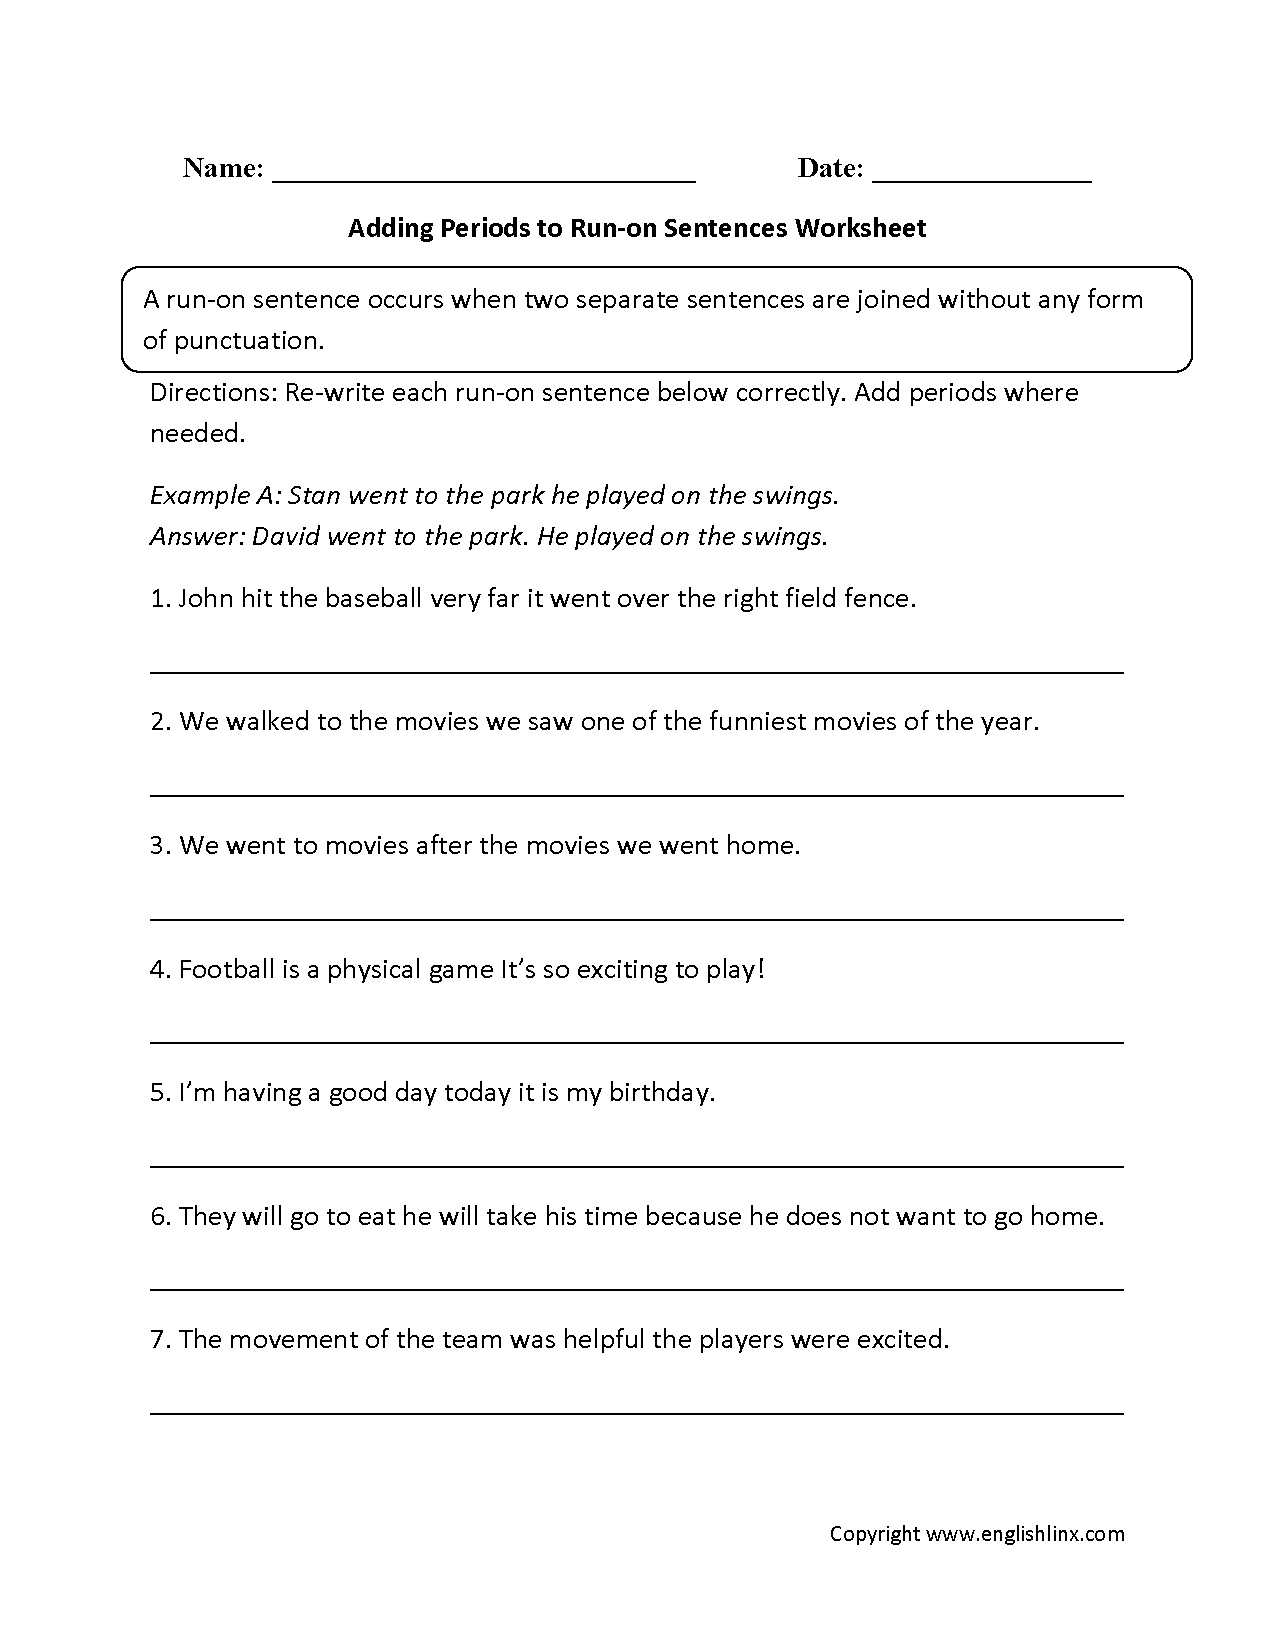 Adding Periods to Run on Sentences Worksheets